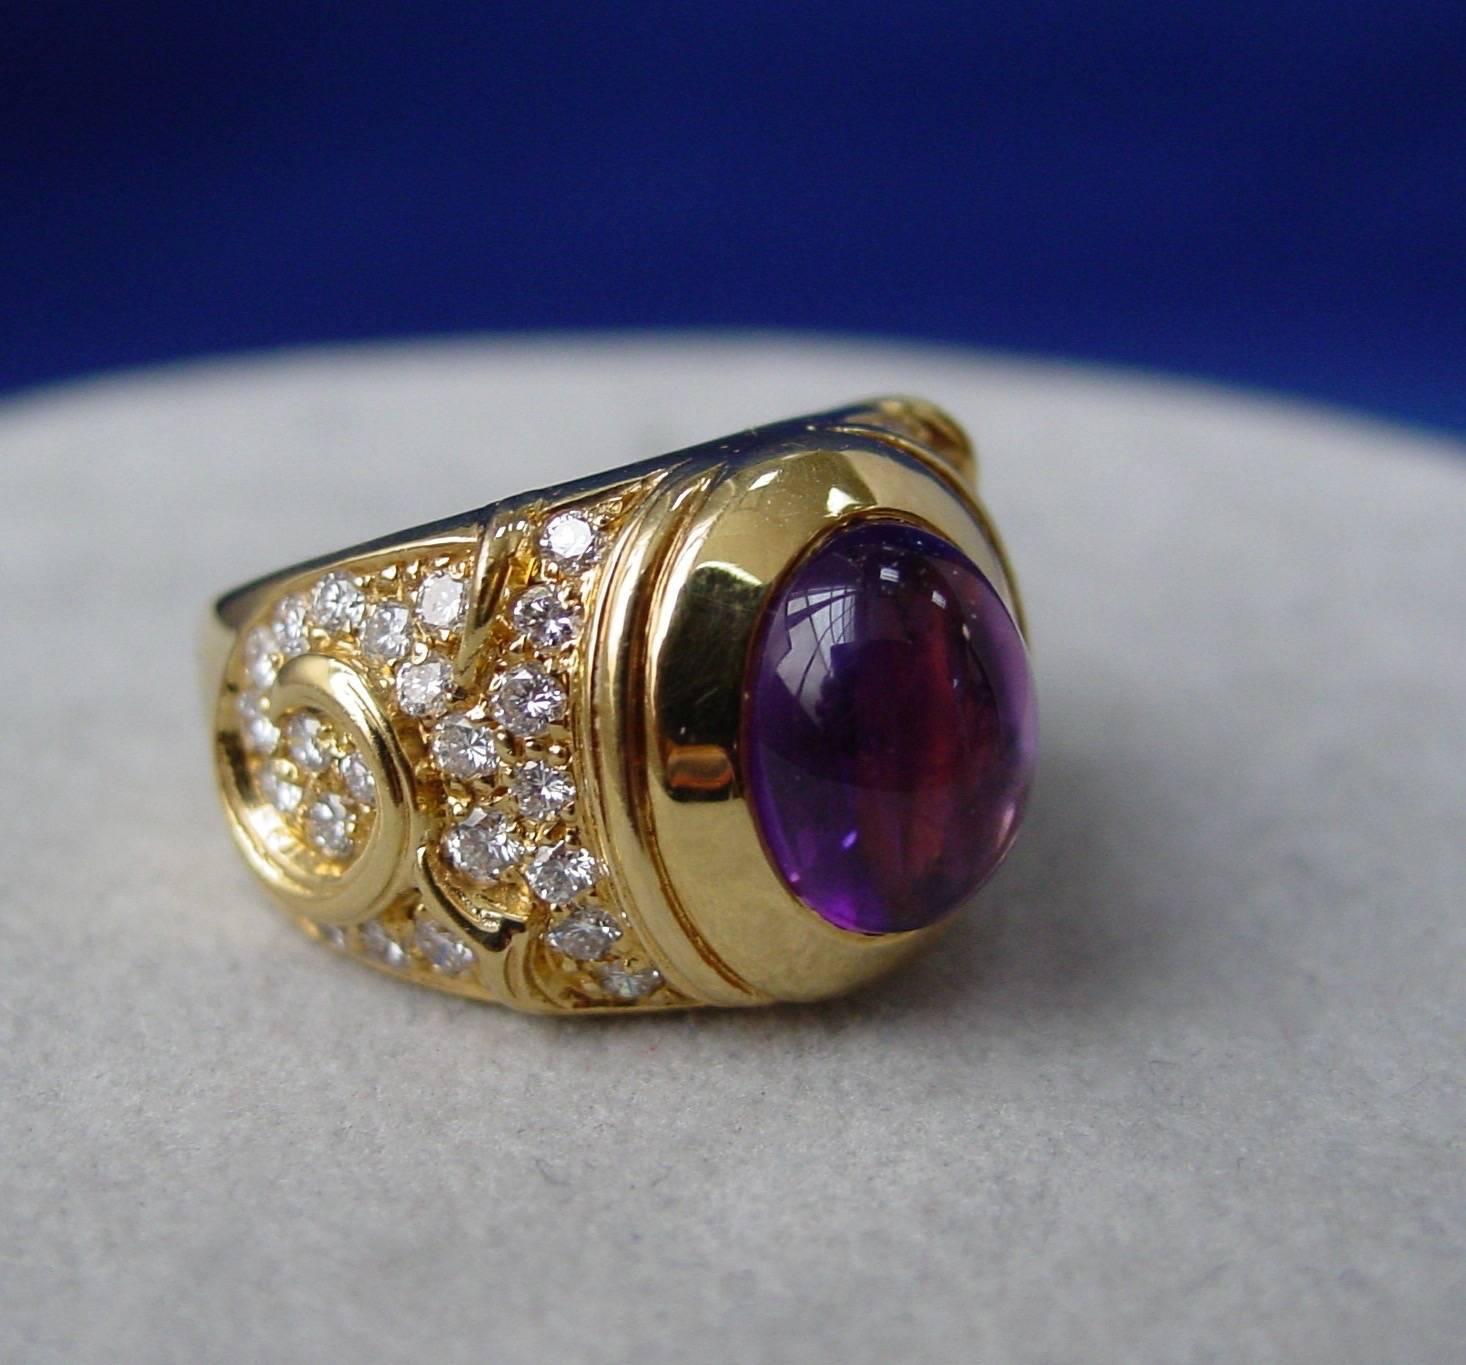 A  luscious cabochon amethyst and diamond "Lalli" ring by Marina B. The ring is mounted in 18 karat yellow gold and set with approximately 1.25 carats of round brilliant diamonds. The ring is stamped Marina B and numbered C3044.